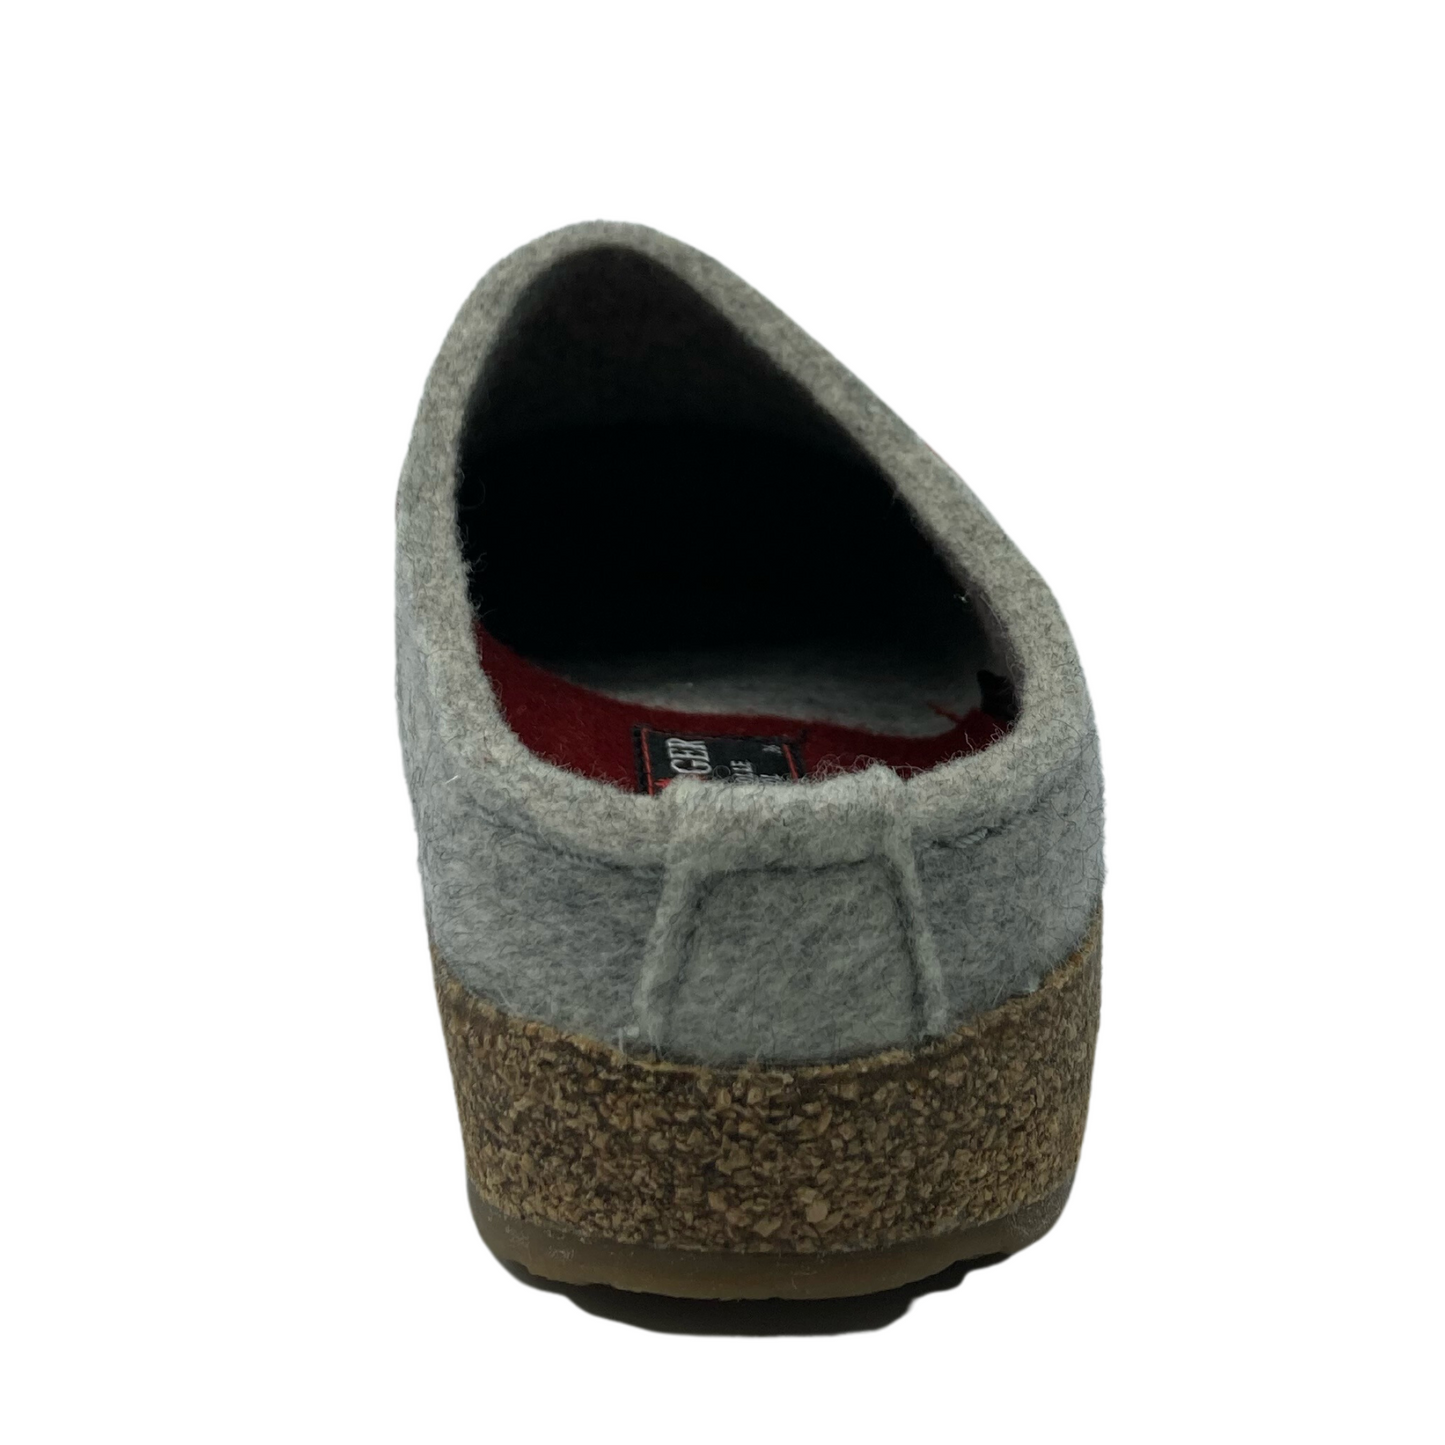 Back view of grey wool felt clog with cork outsole